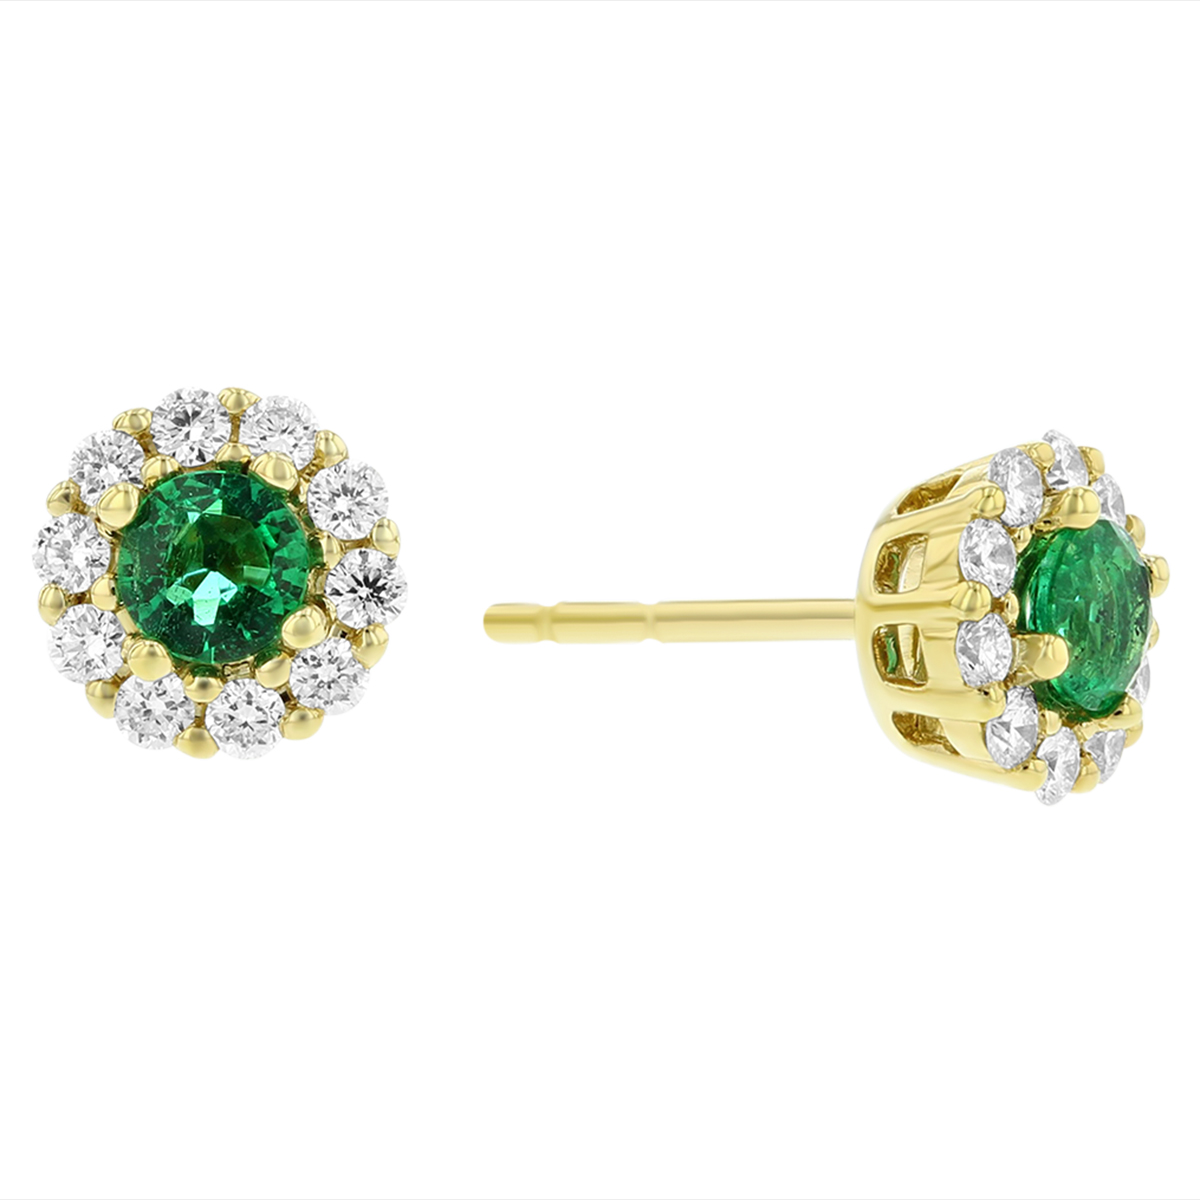 14k Yellow Gold Round Emerald And Diamond Earrings 